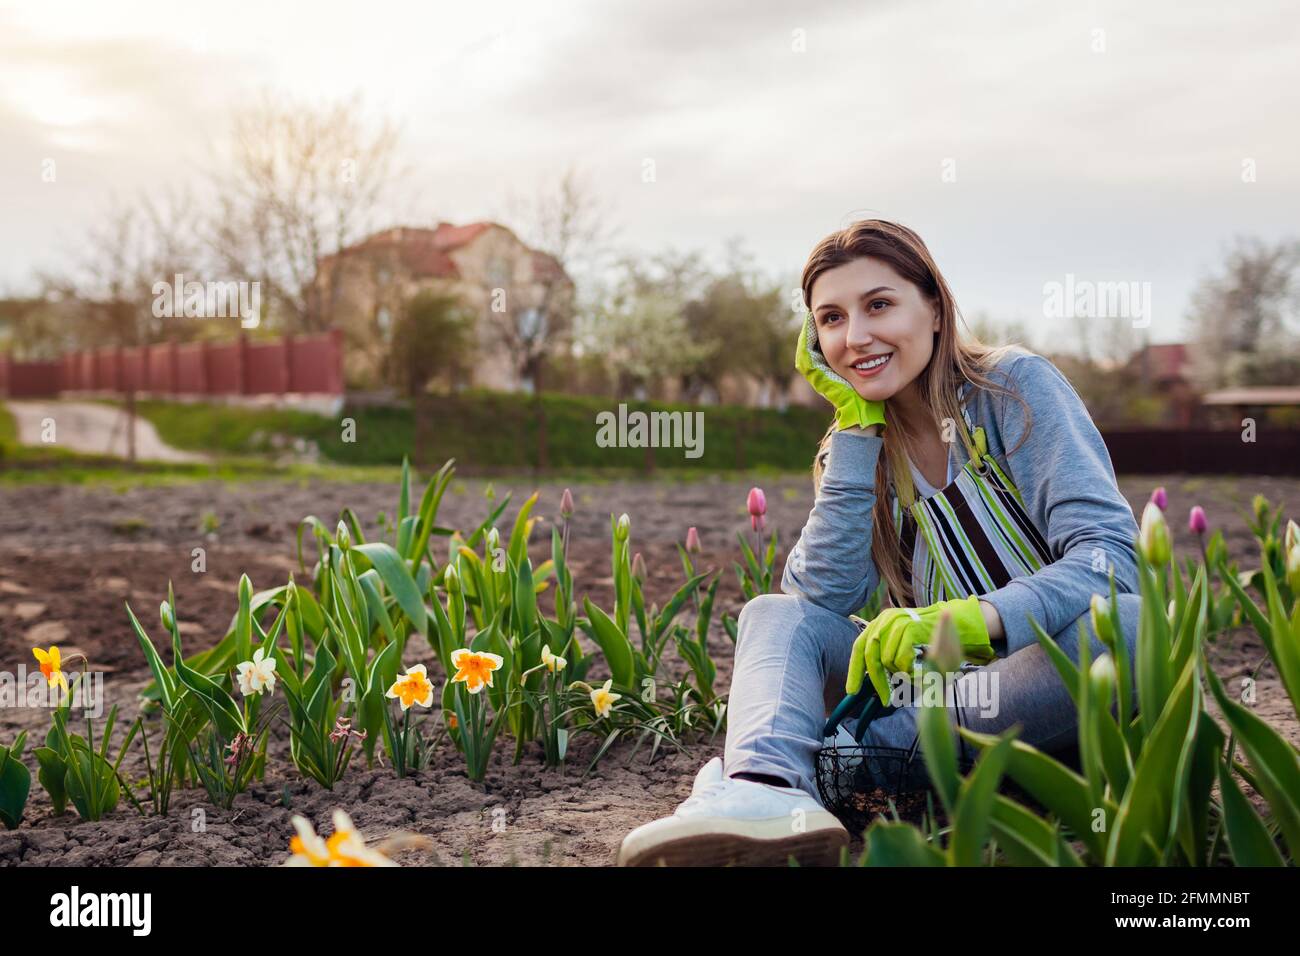 Smiling gardener relaxing among fresh tulips, daffodils, hyacinths in spring garden. Happy woman admires colorful flowers sitting on the ground Stock Photo